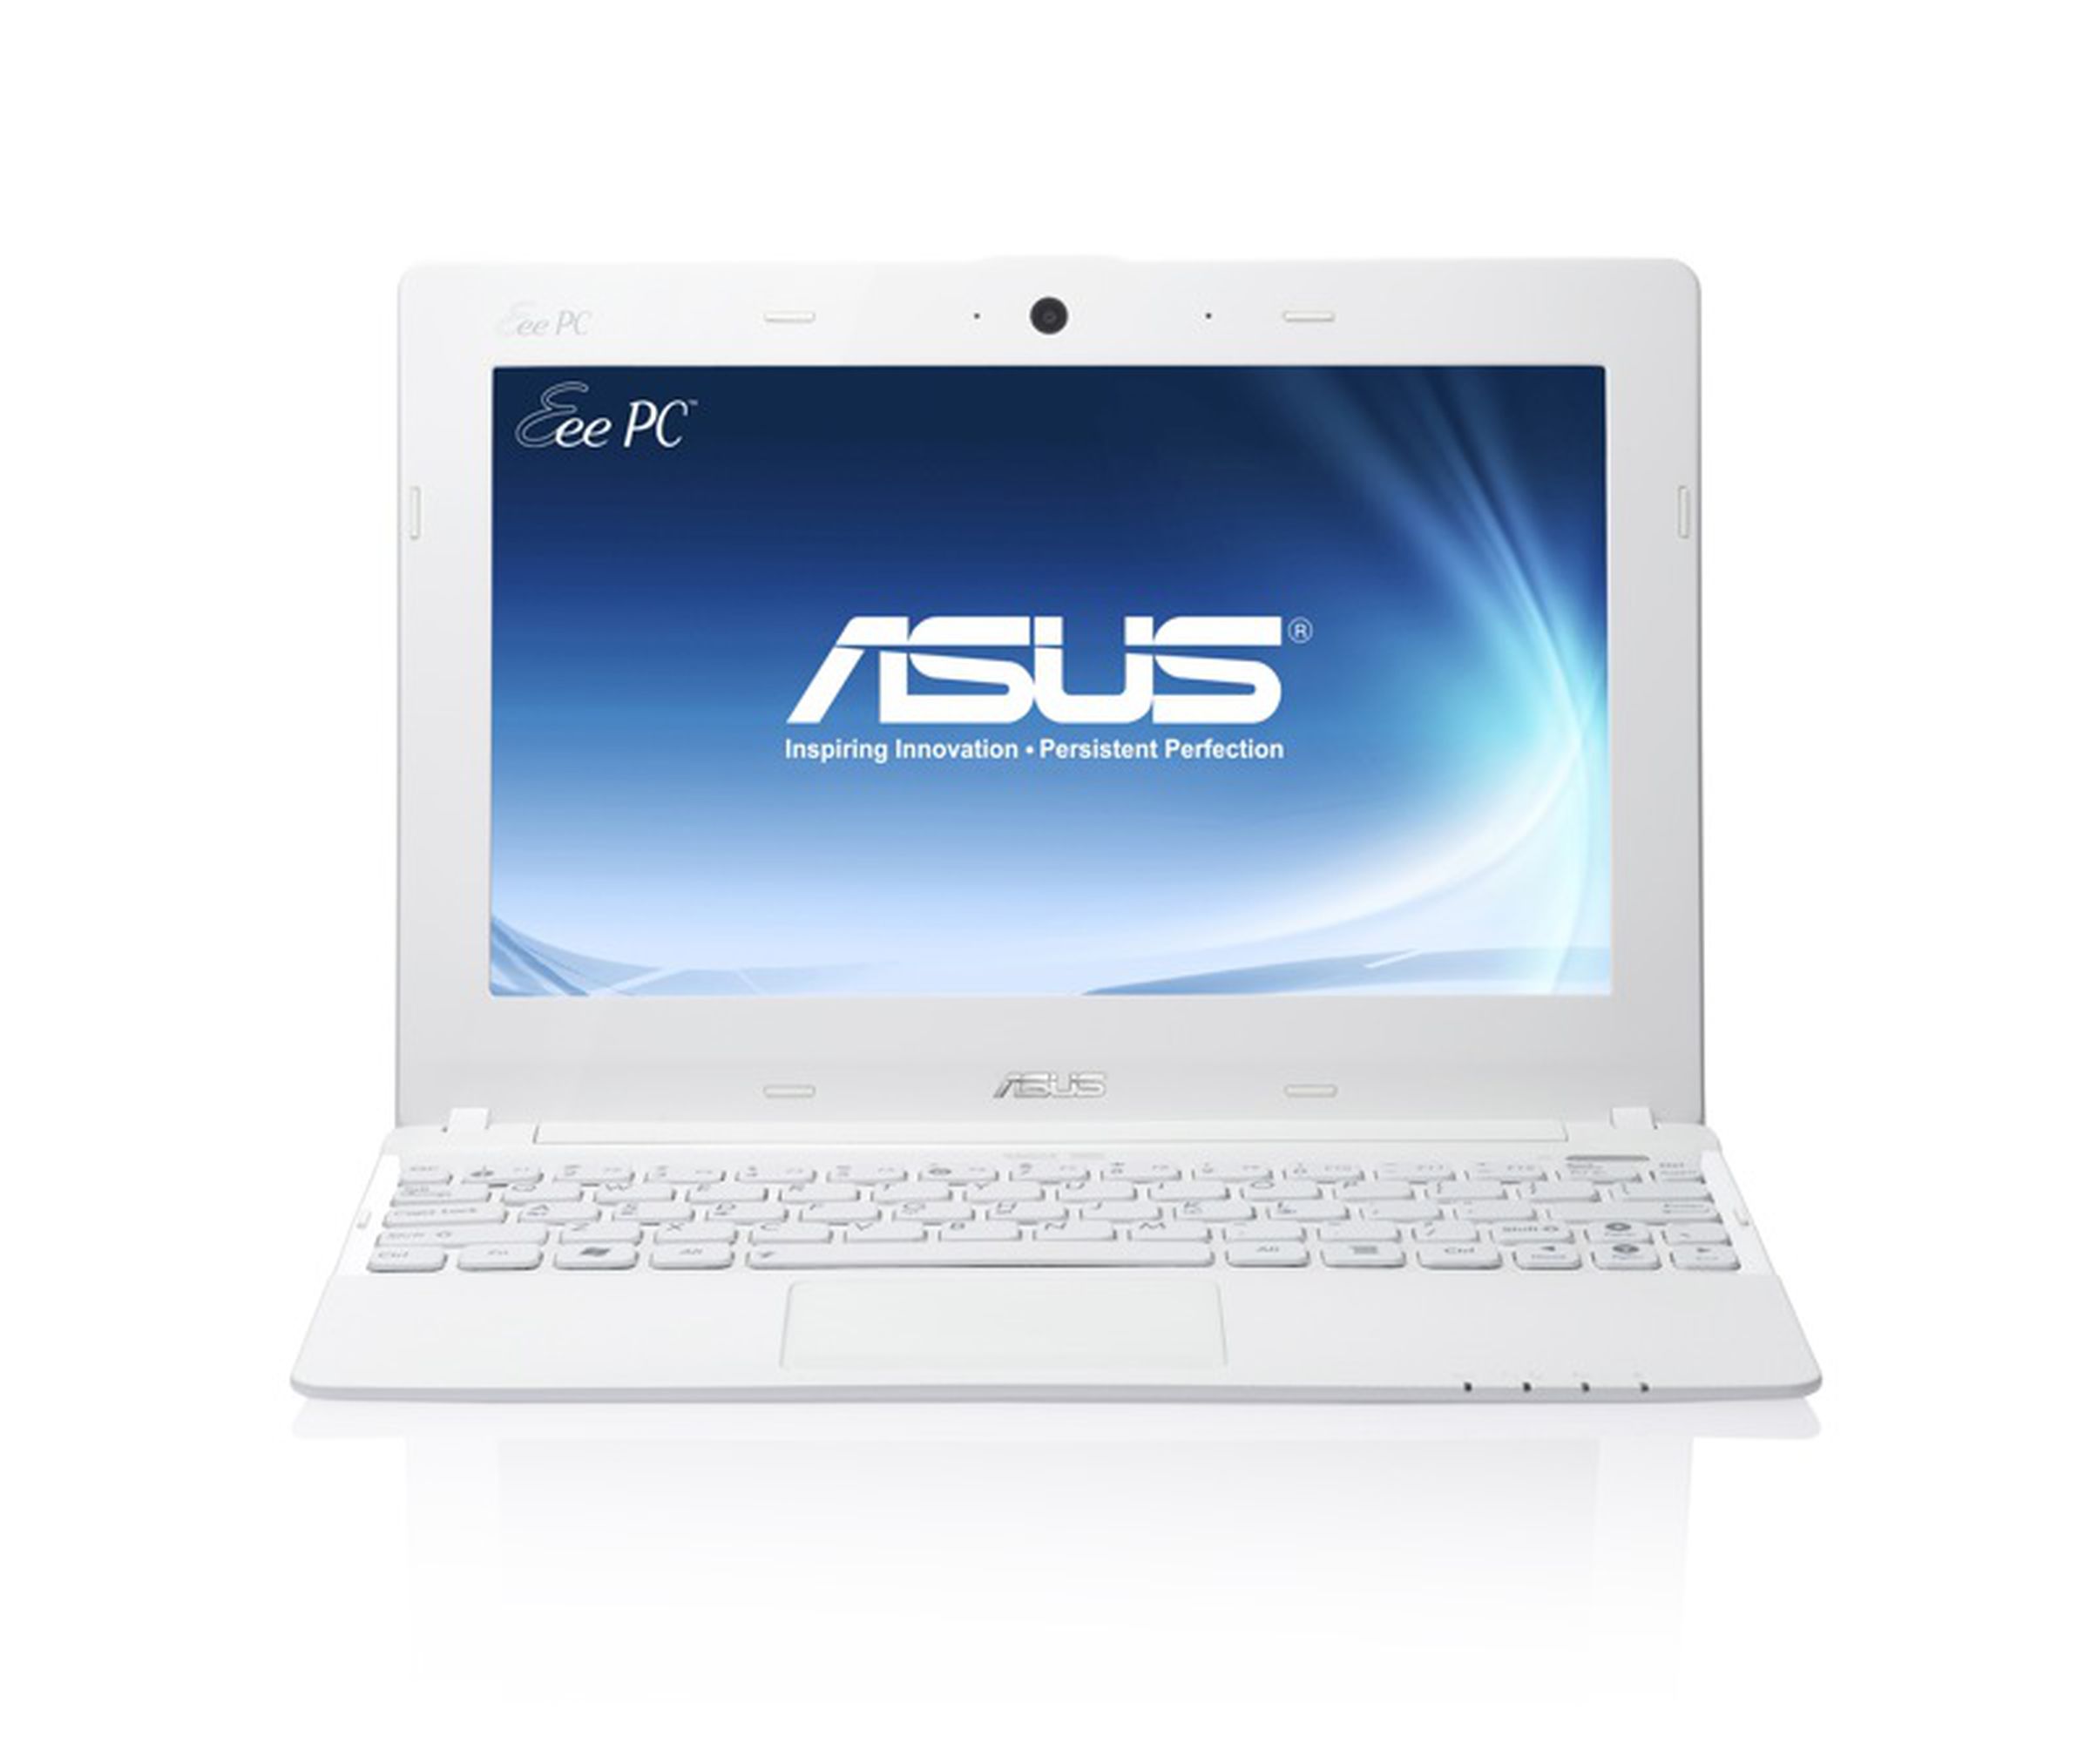 Asus Eee PC X101 pictures